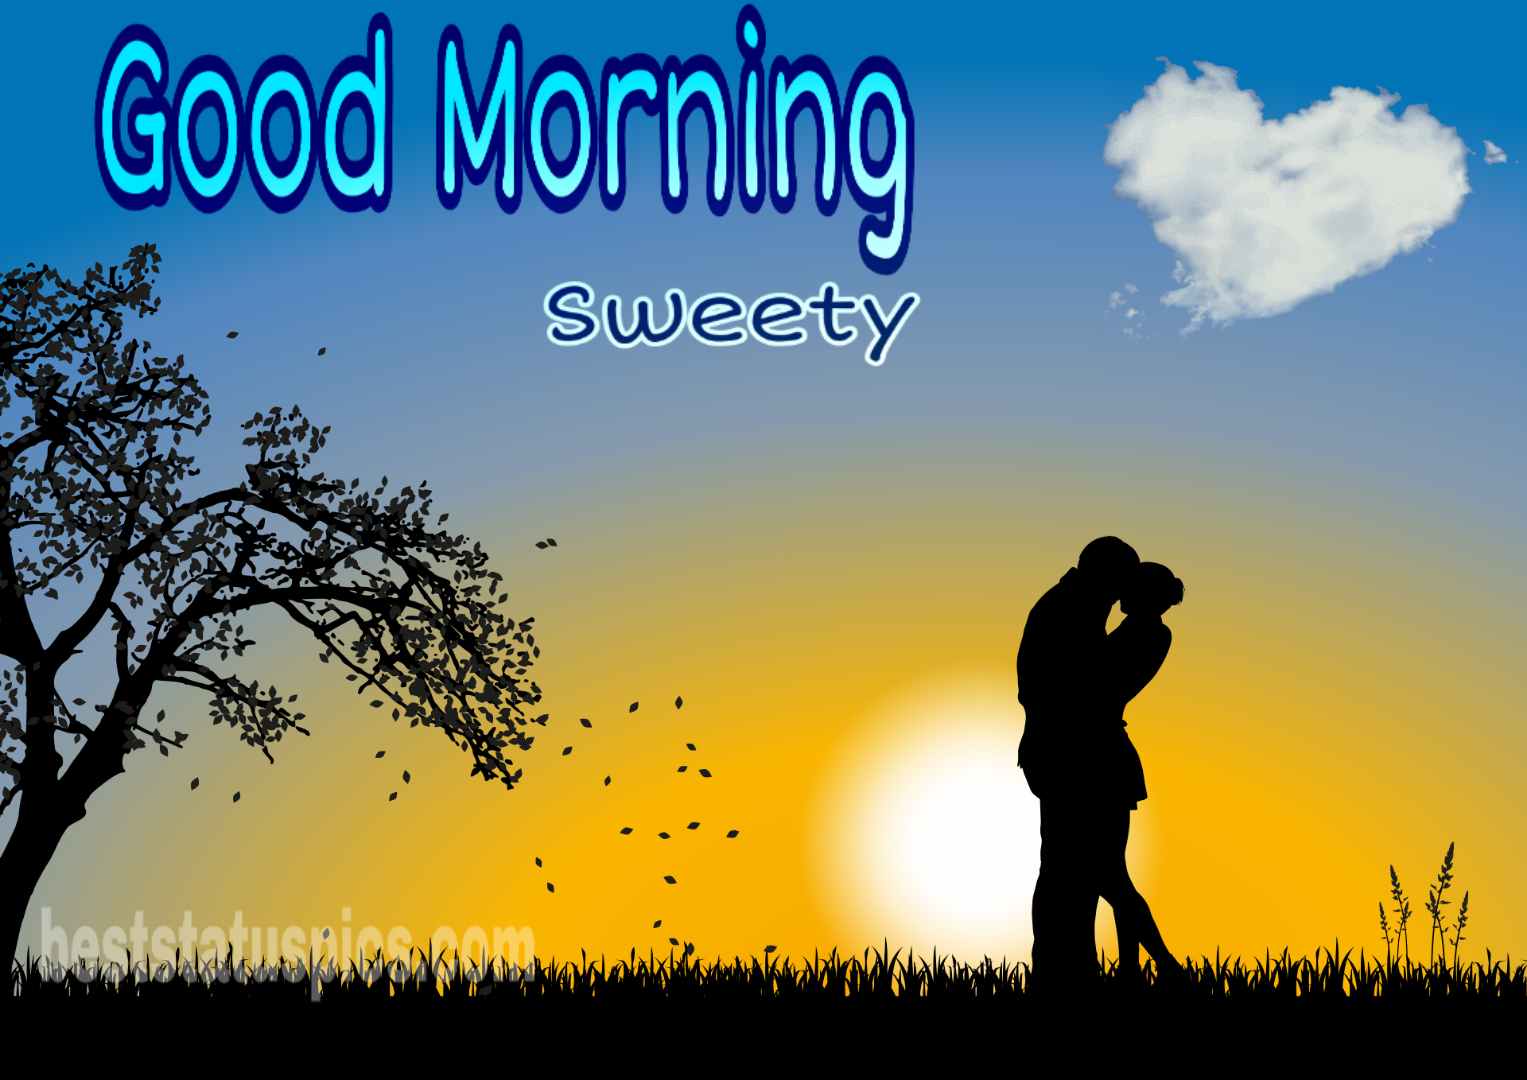 Good Morning Image With Love Couple HD